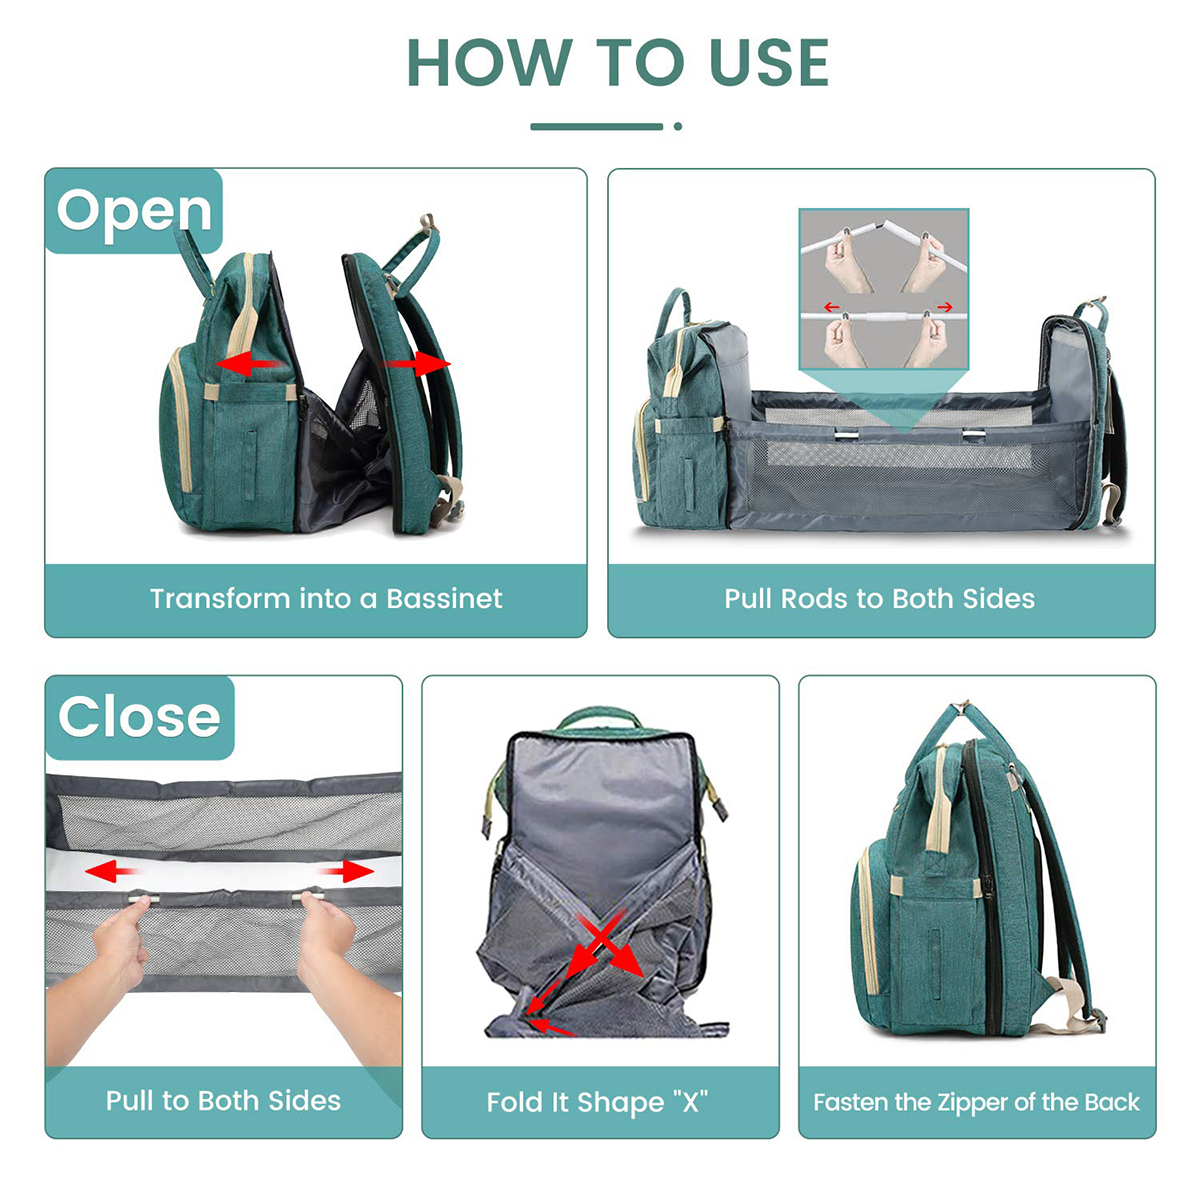 Multifunctional-Folding-Diaper-Bag-Waterproof-Baby-Sleep-Infant-Bed-Changing-Station-Outdoor-Travel--1810331-4